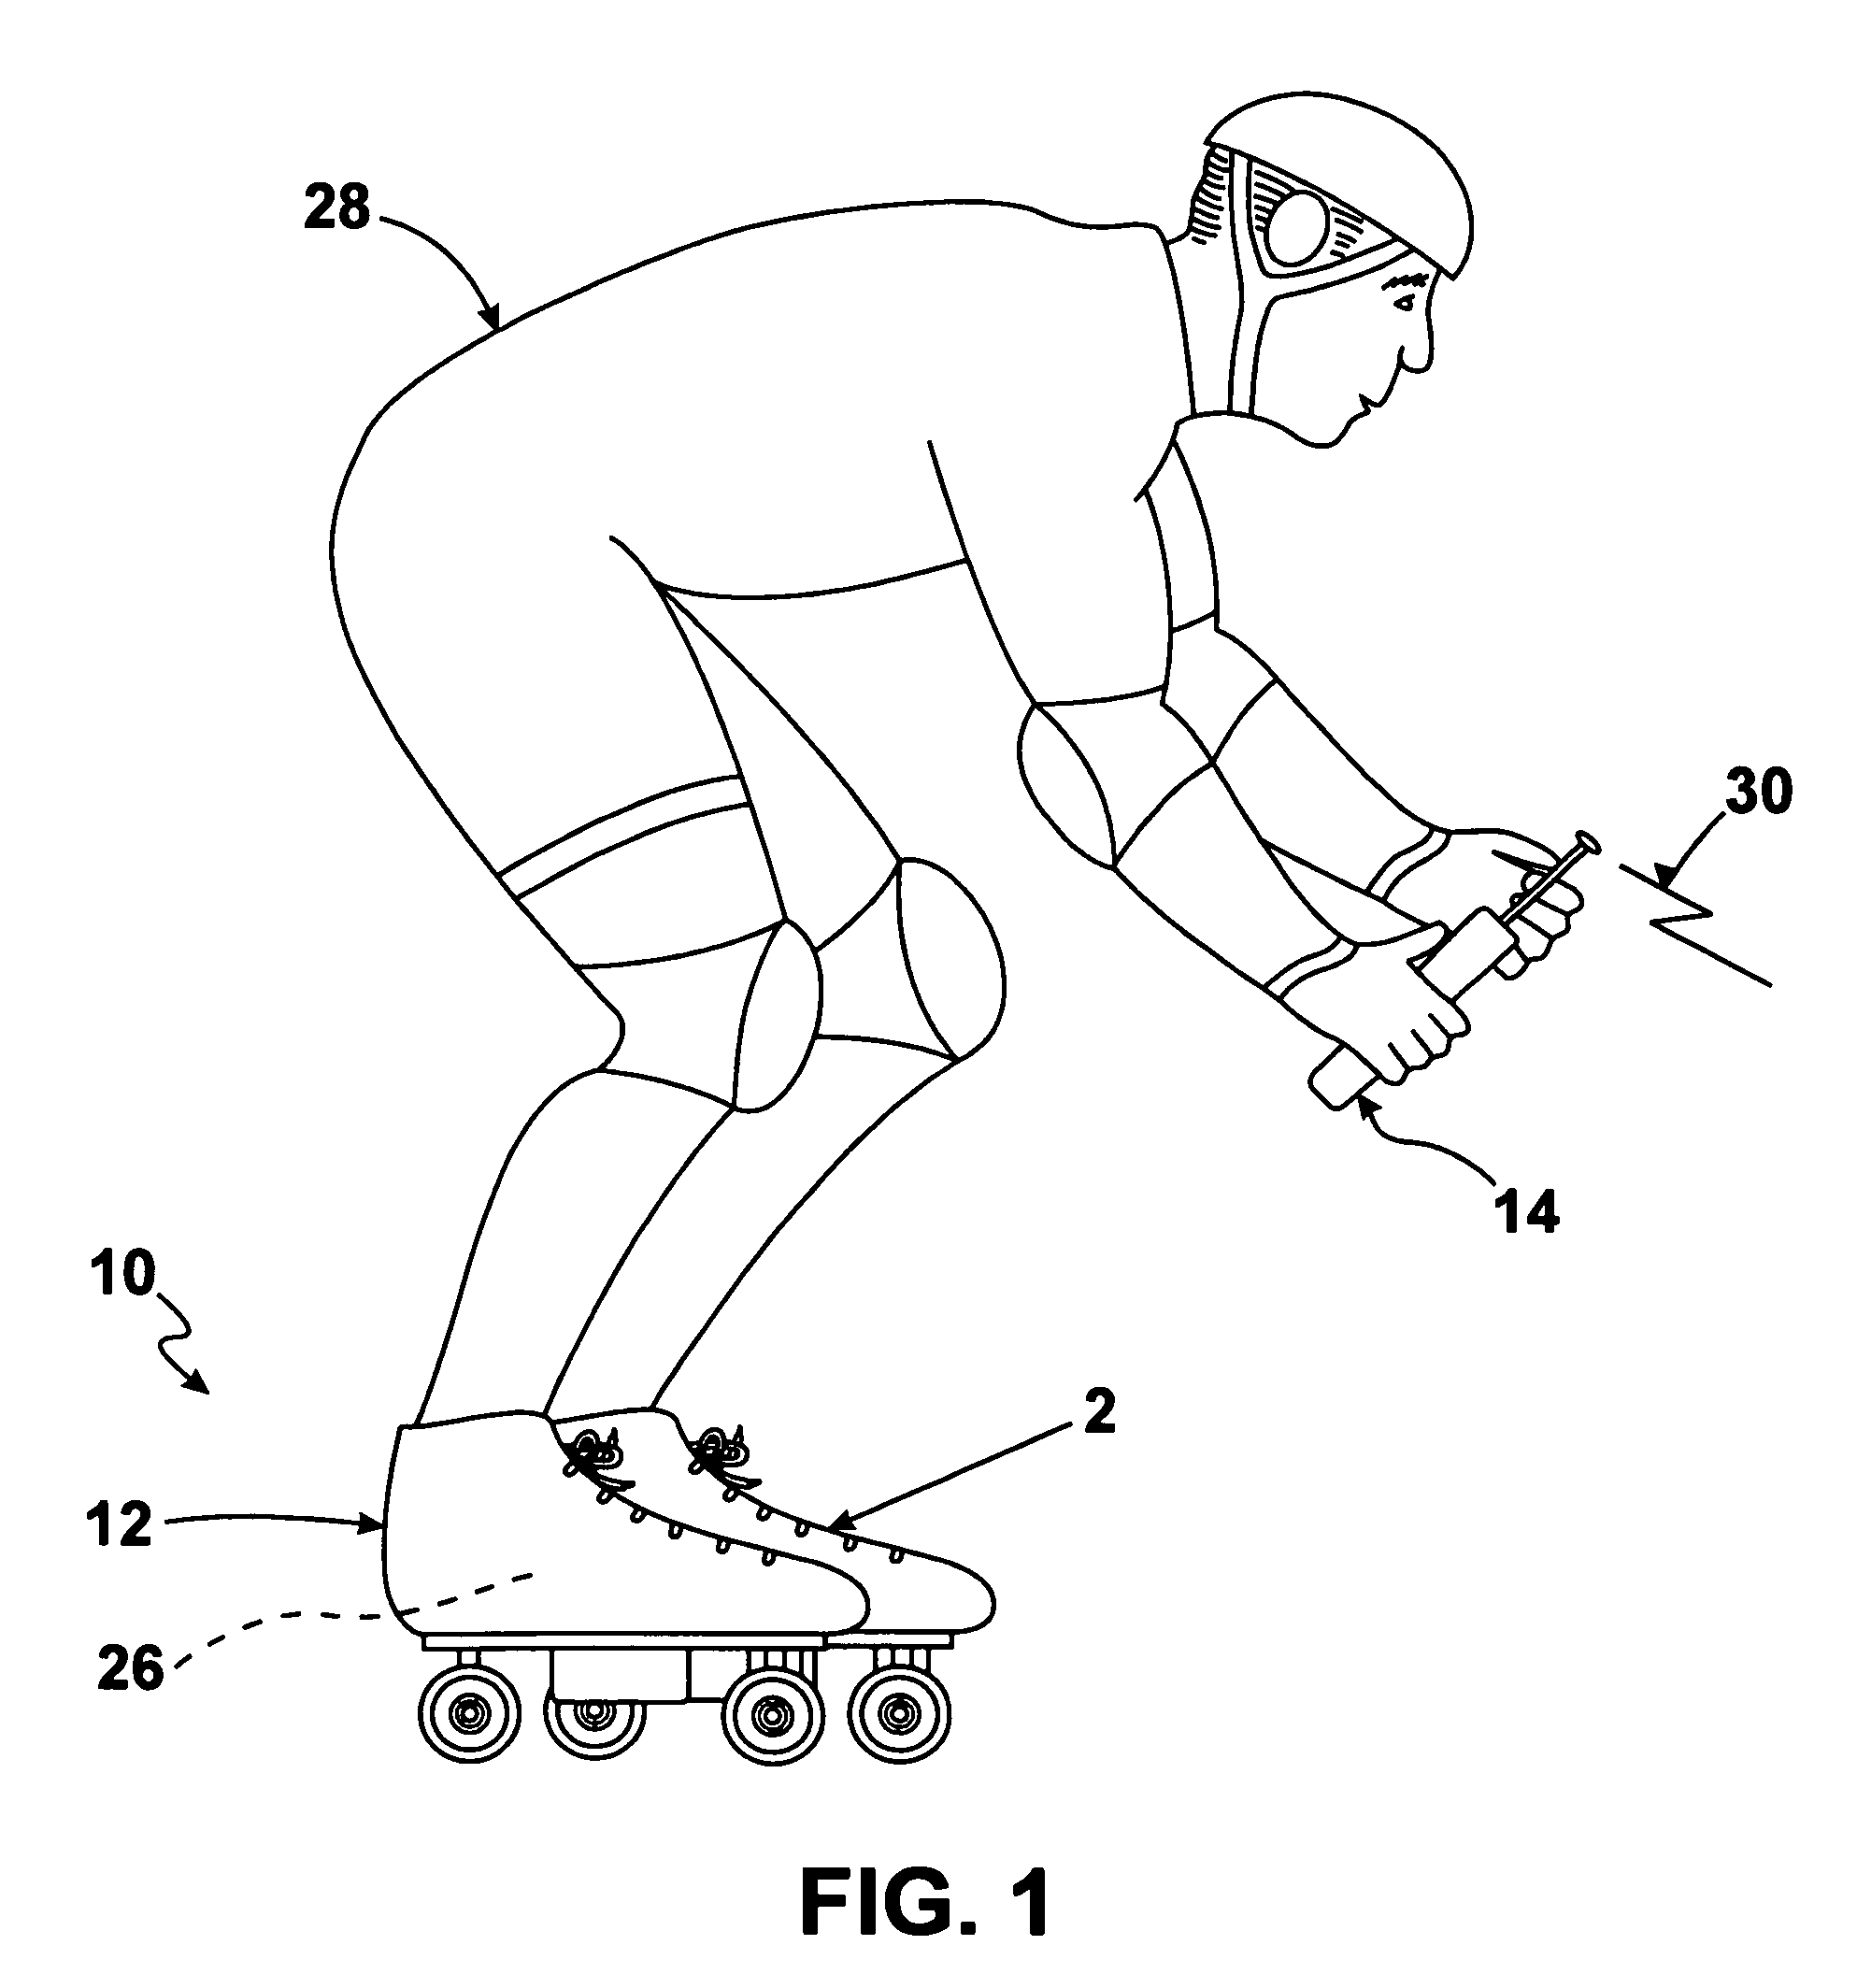 Battery-powered, remote-controlled, motor-driven, steerable roller skates